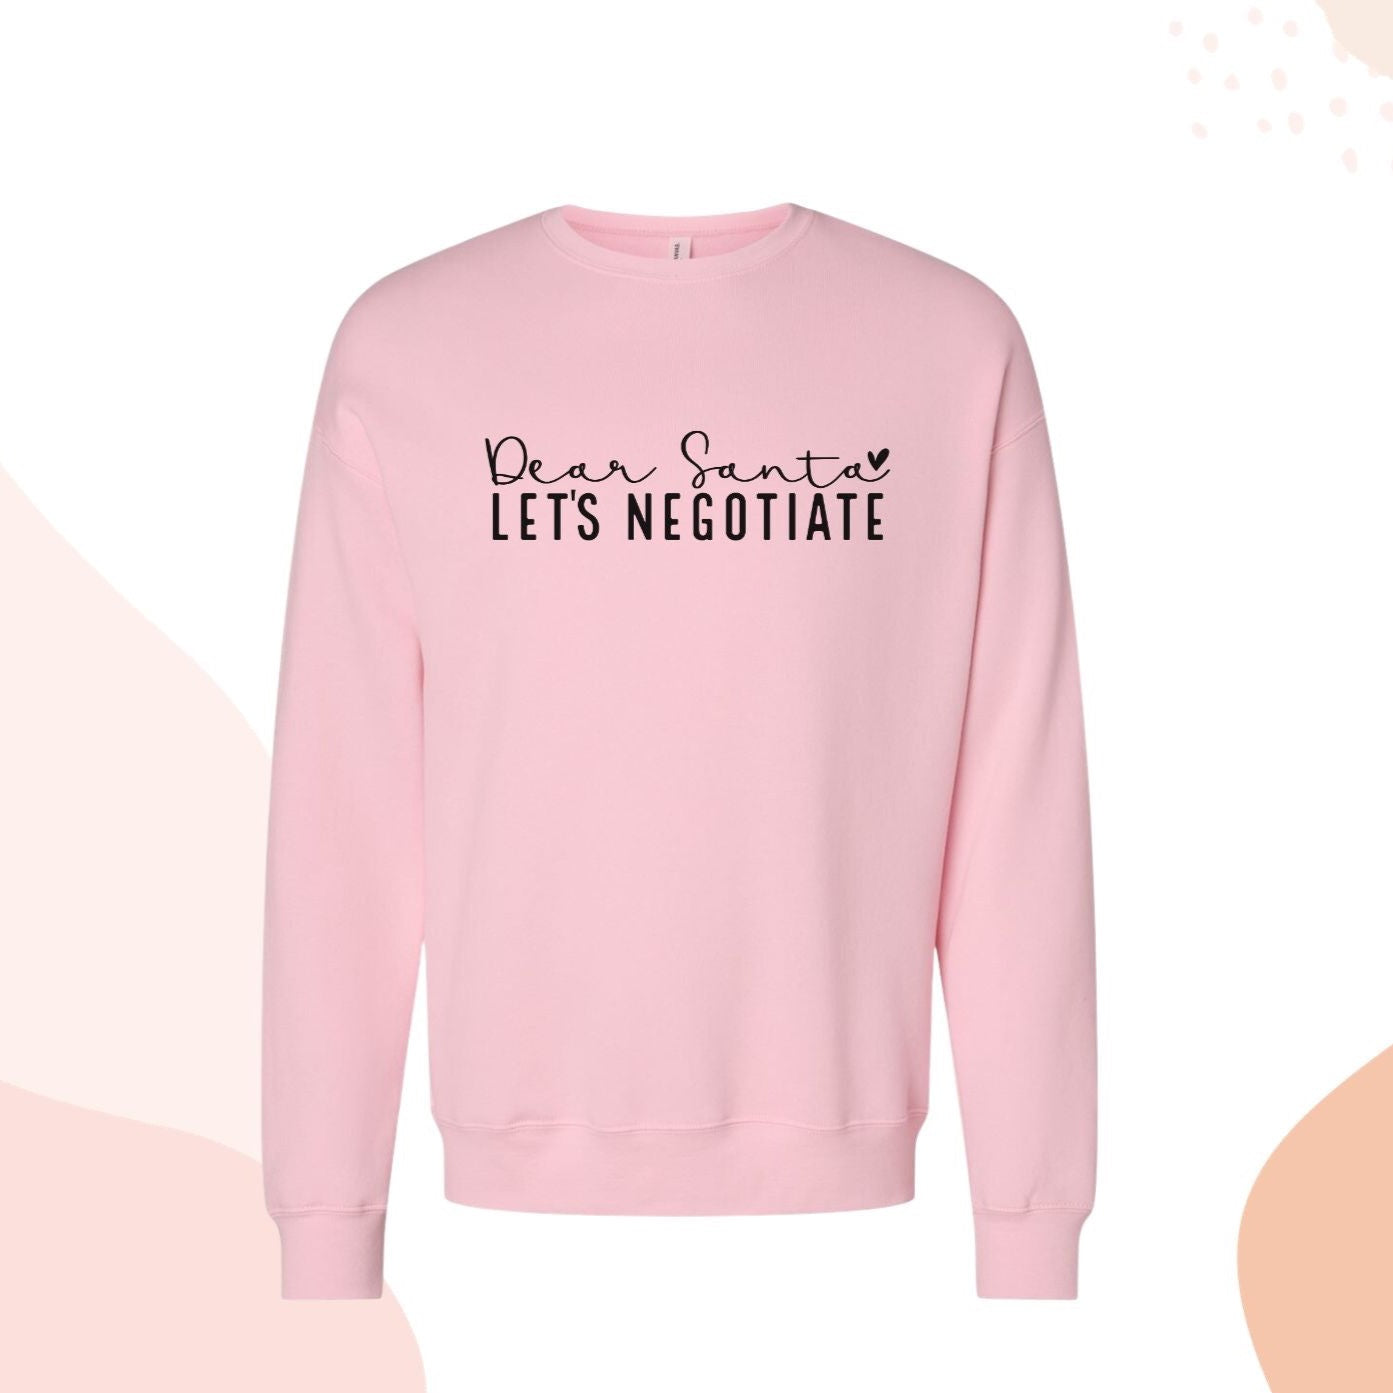 Christmas Sweatshirt Pink Dear Santa Let's Negotiate, Funny Santa Claus Crewneck Sweater Pink for Her, Cute gift for Teen Girt or Mom Pink